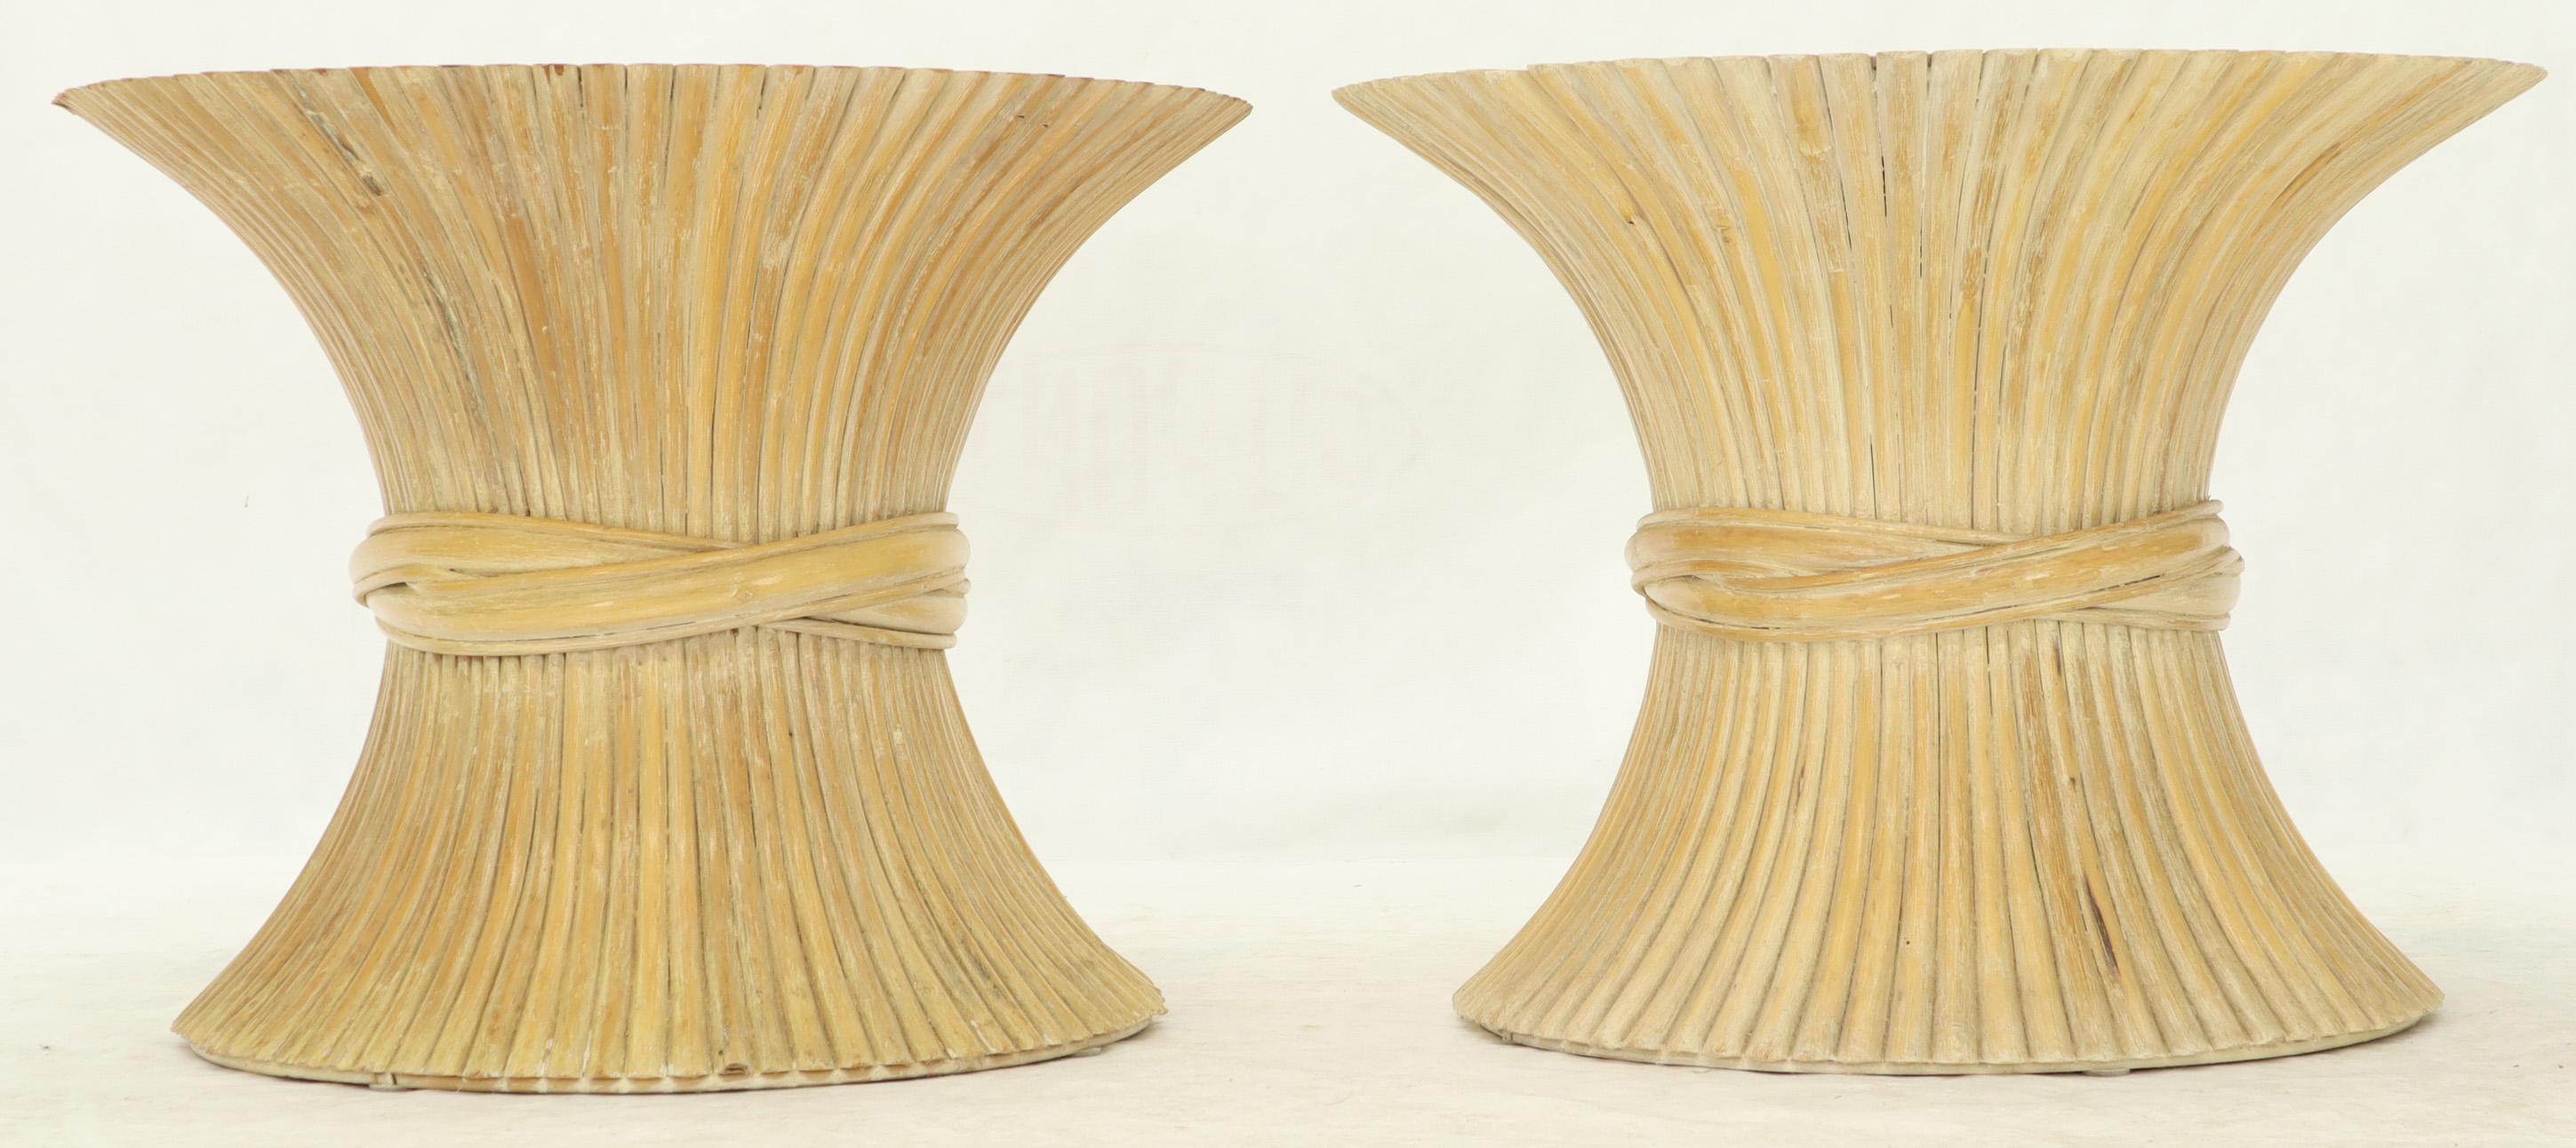 Pair of Sheaf of Bamboo Wheat Side End Occasional Tables Pedestals by McGuire (Moderne der Mitte des Jahrhunderts)